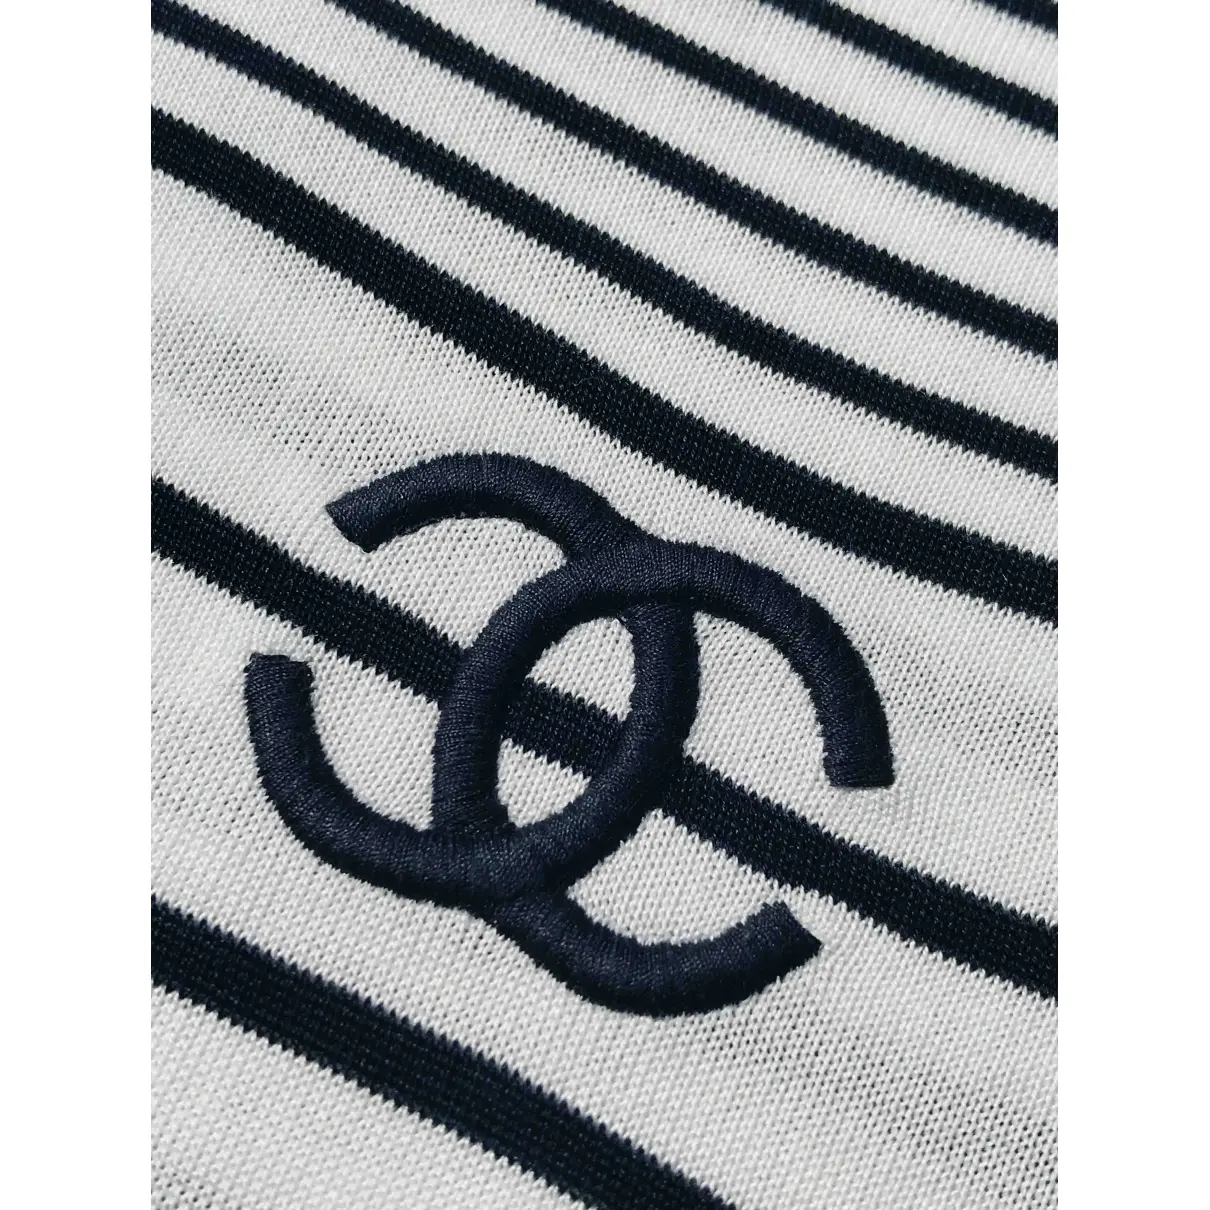 Jersey top Chanel - Vintage